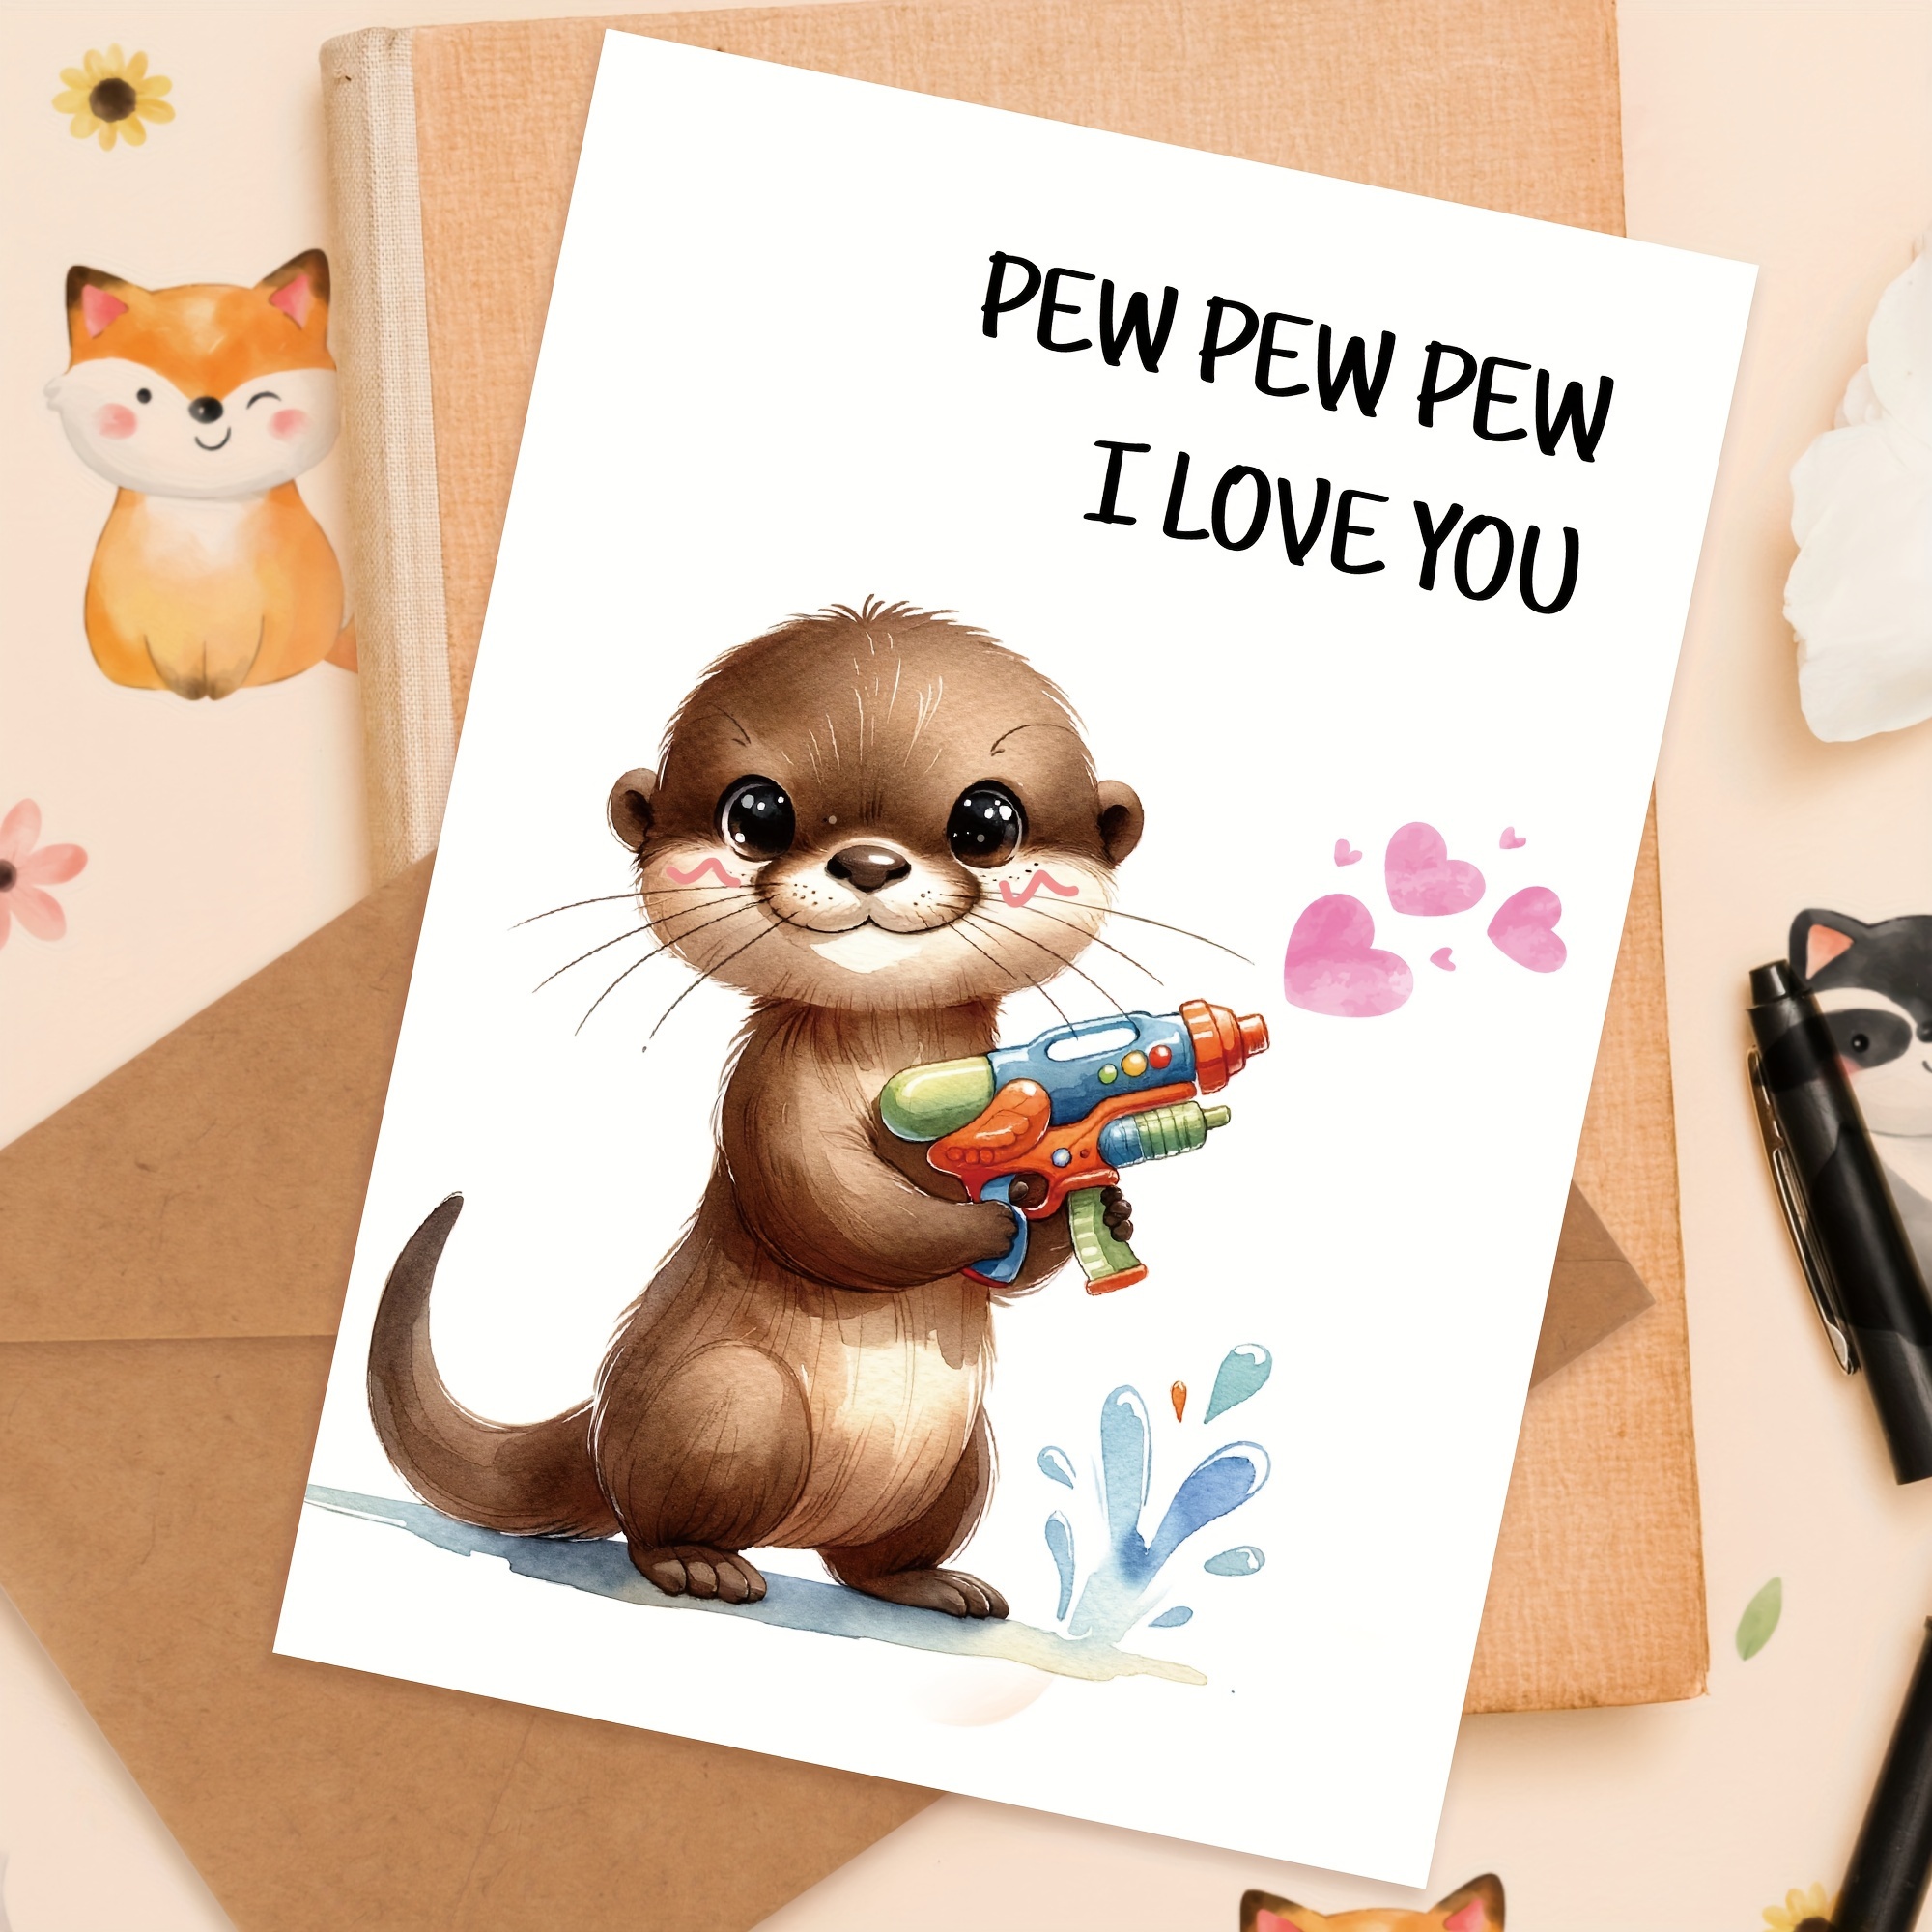 

Funny Card, Pew Pew Pew I Love You Card For Girlfriends - Otter Anniversary Card For Husbands - Funny Valentine's Day Card For Boyfriends